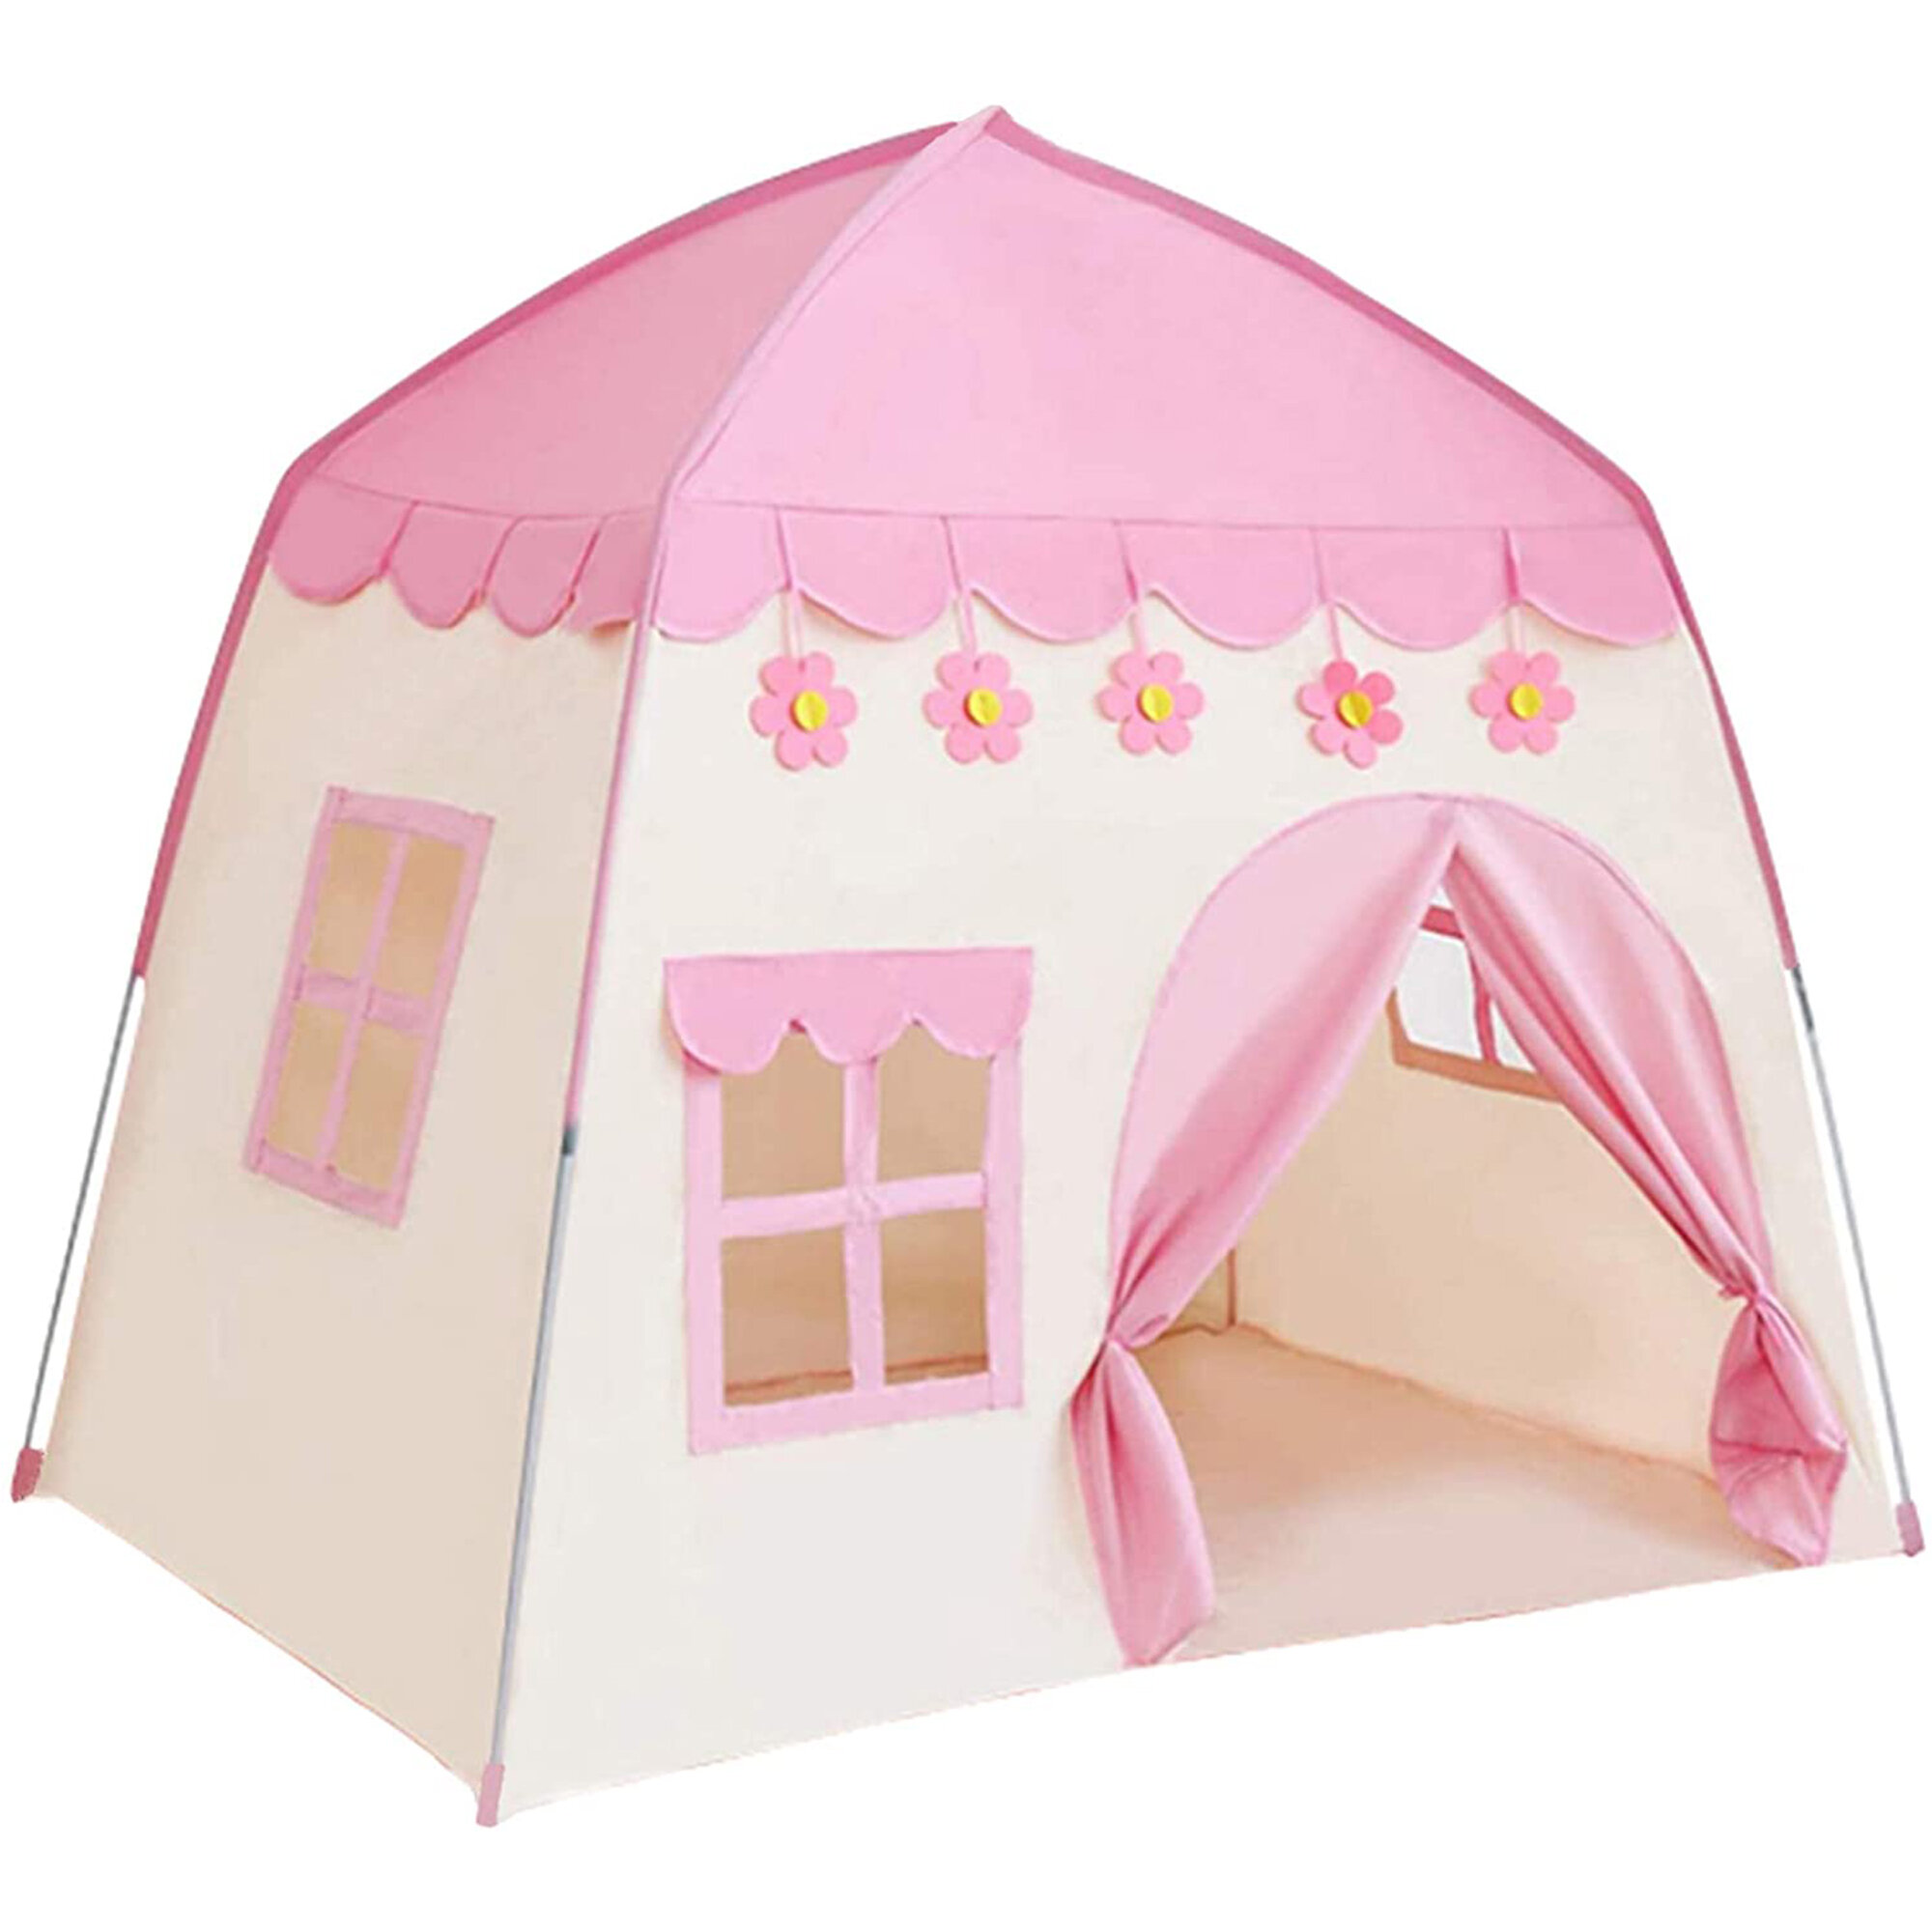 Princess Castle Play House Indoor/Outdoor Childrens Kids Play Tent For Baby Gift 